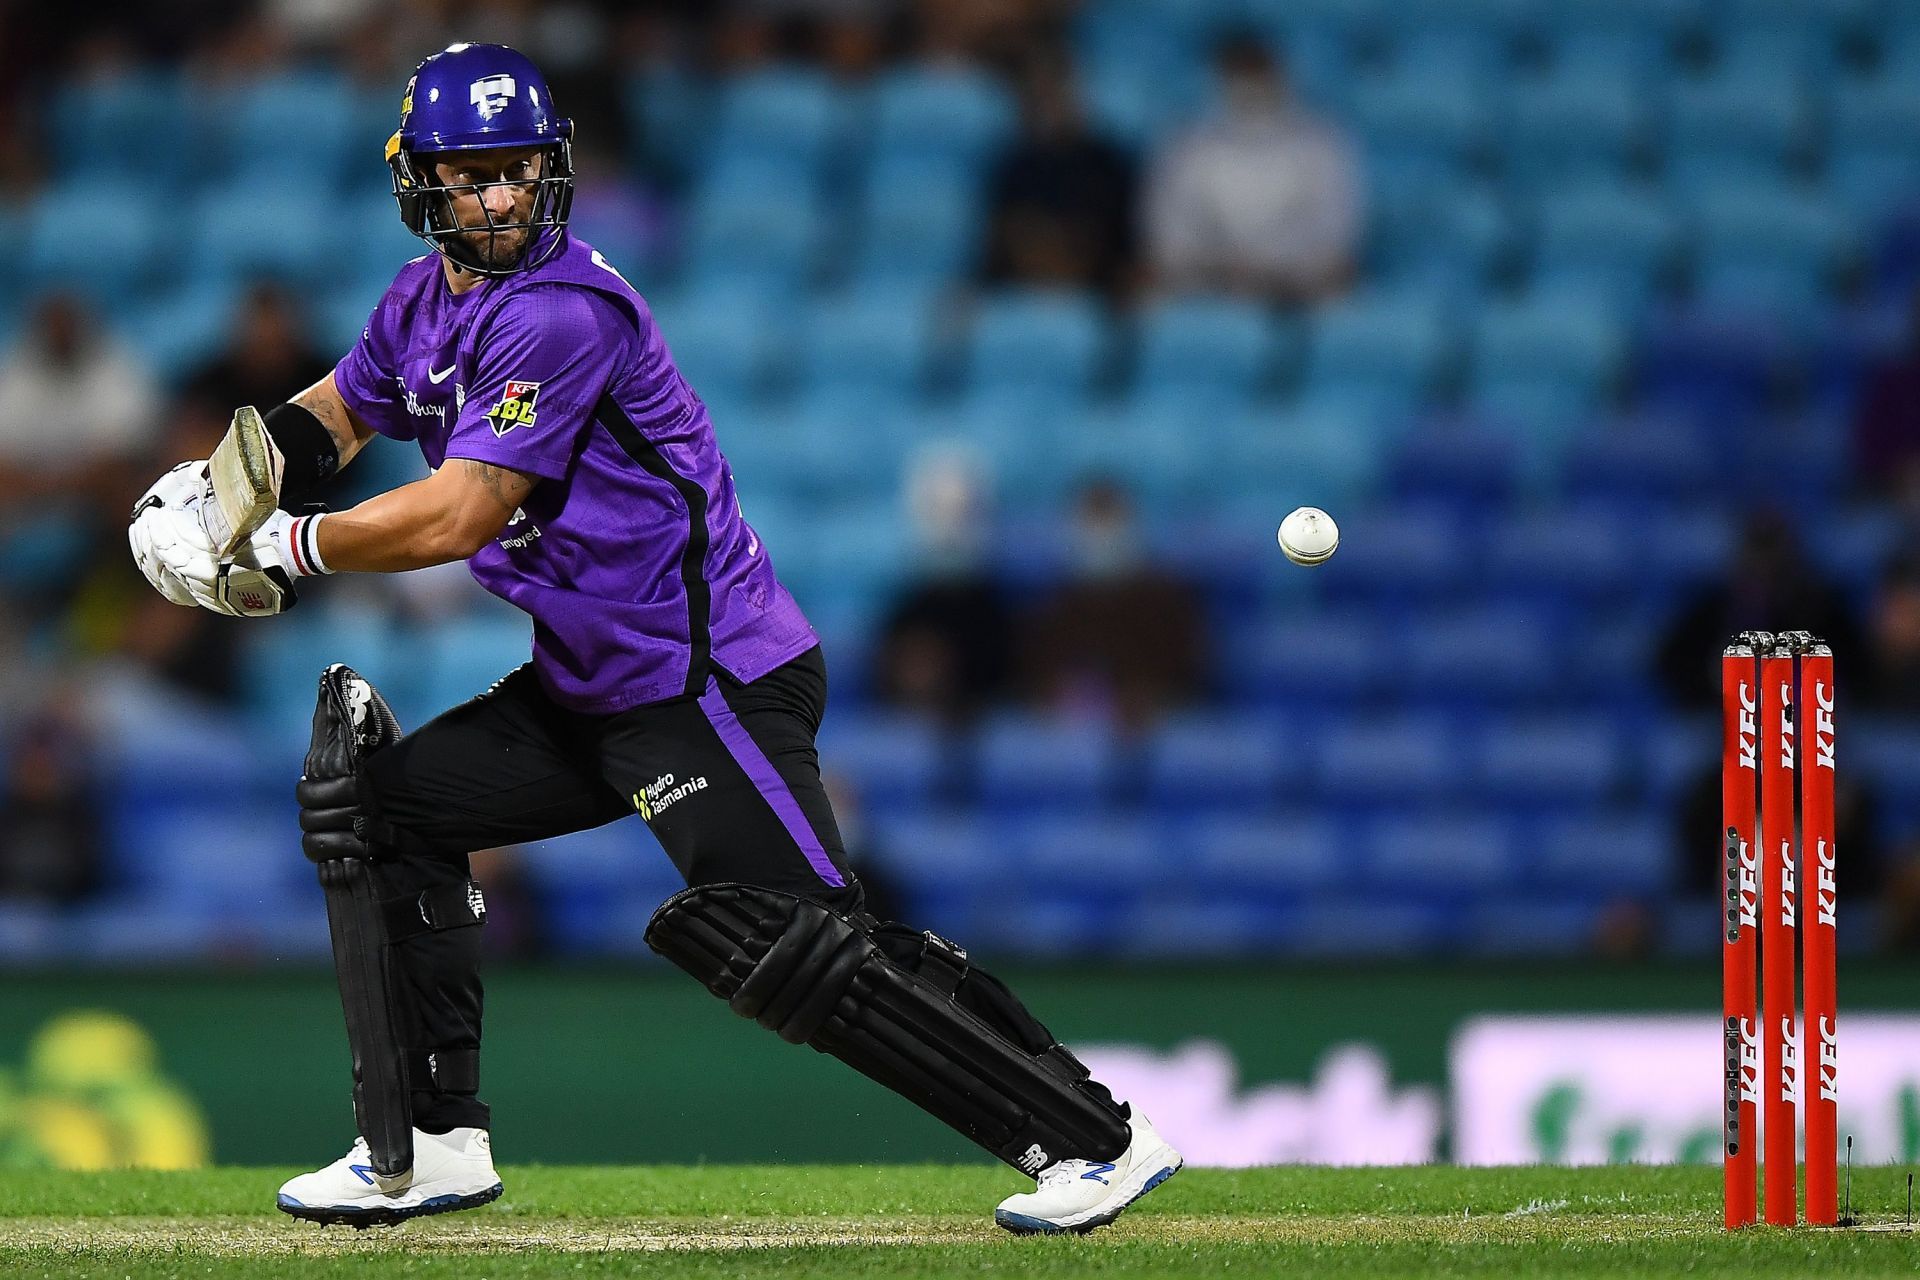 Matthew Wade has been a key player for Hobart Hurricanes in the BBL.